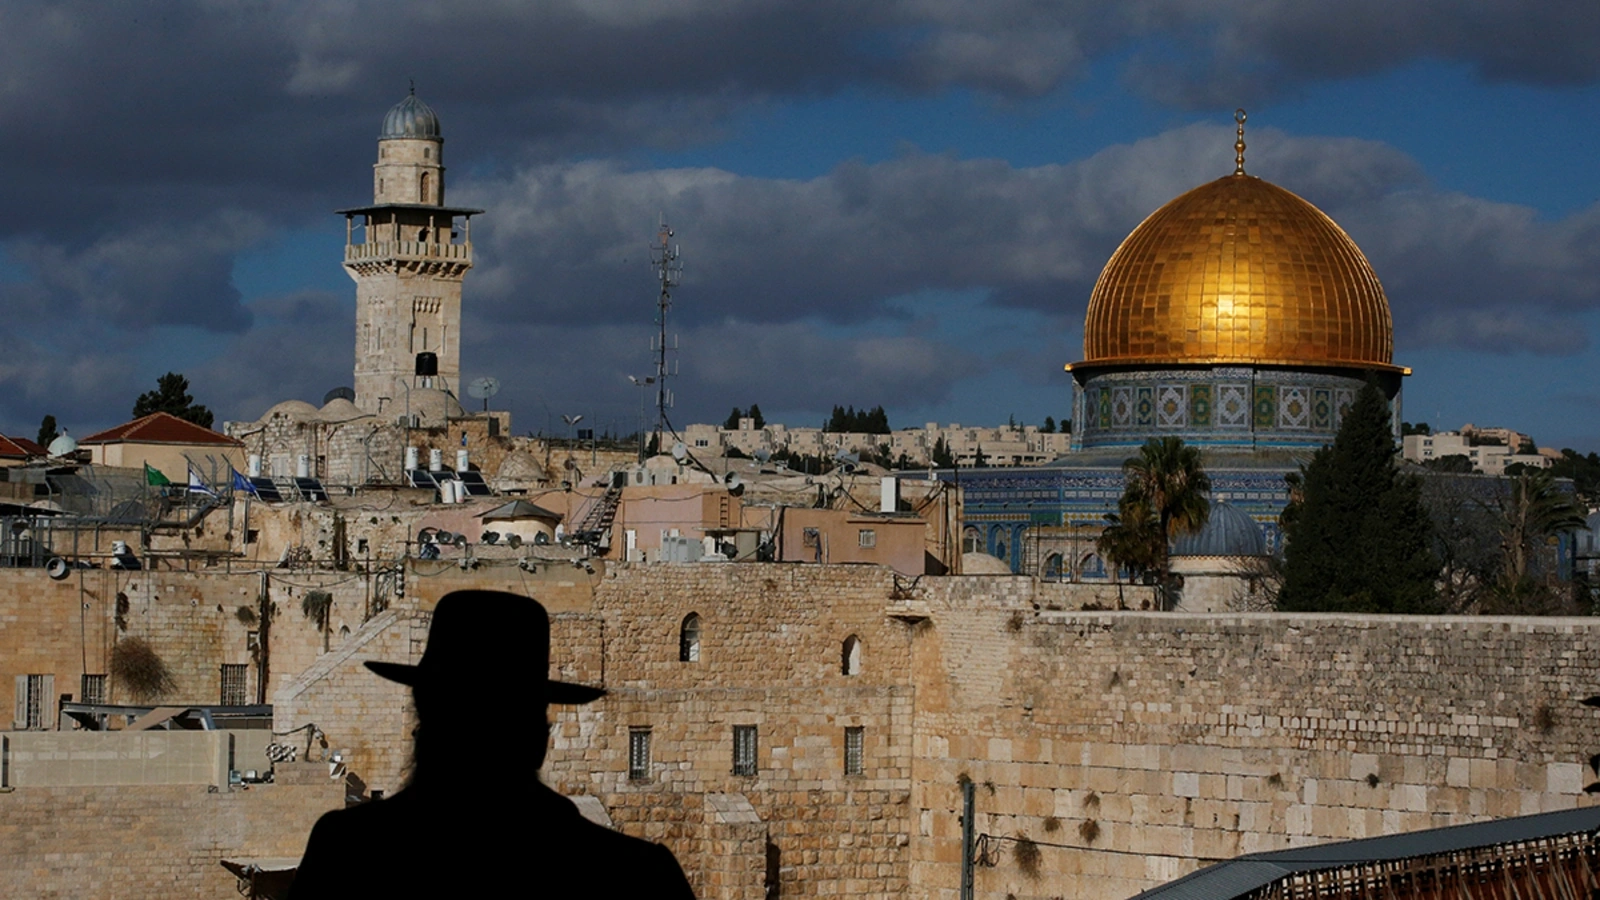 An Israeli man in front of the Dome of the Rock, located in Jerusalem’s occupied Old City on the compound known to Muslims as the Noble Sanctuary and to Jews as the Temple Mount.